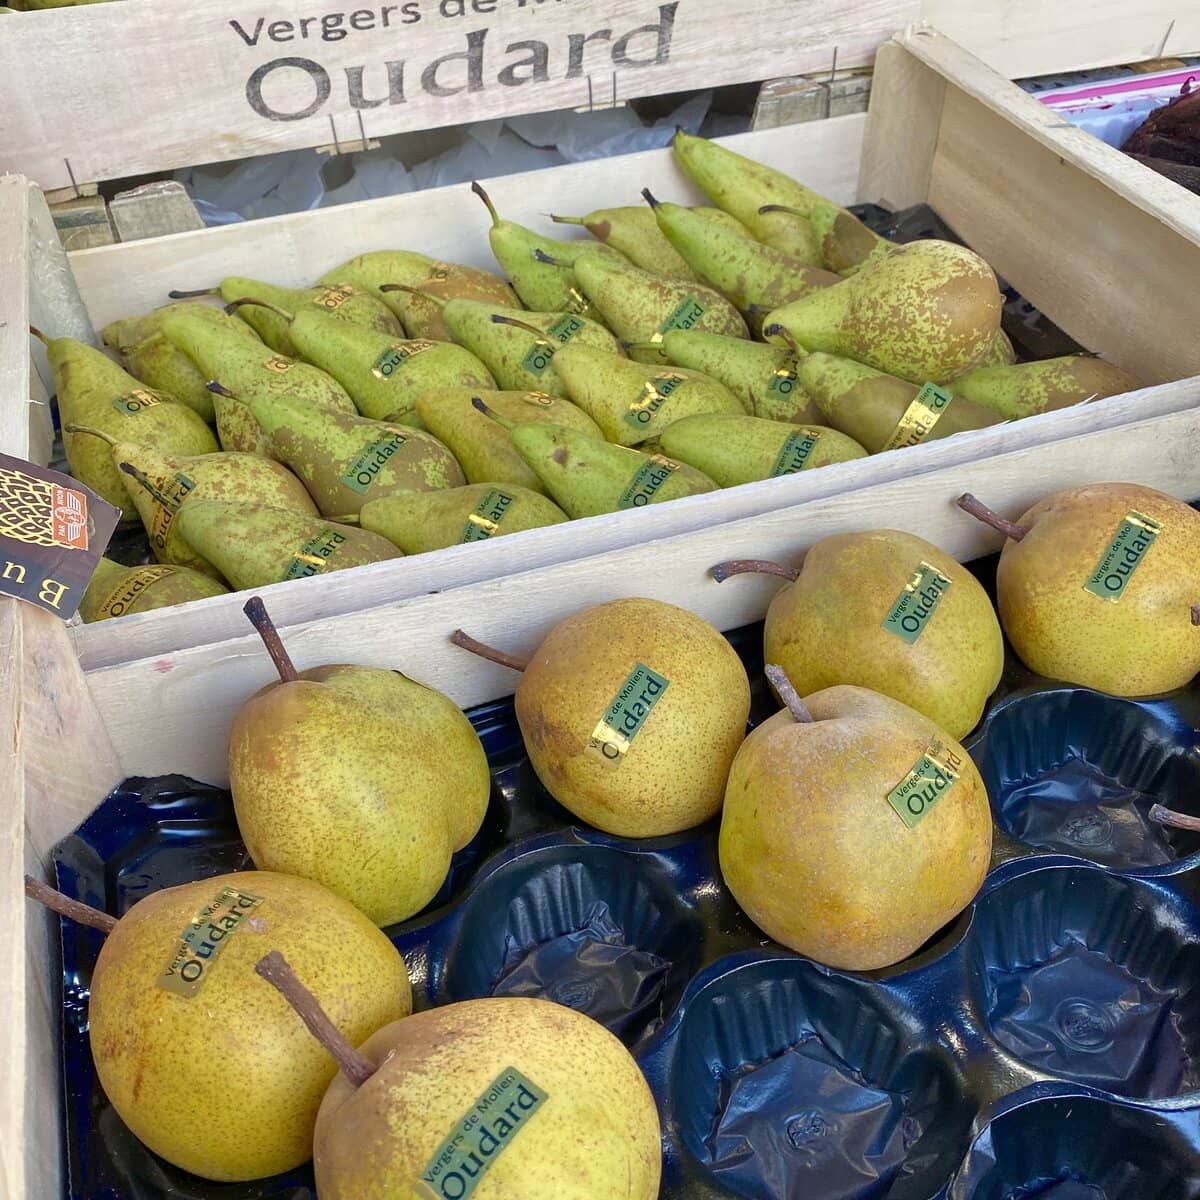 crates of pears at the french market